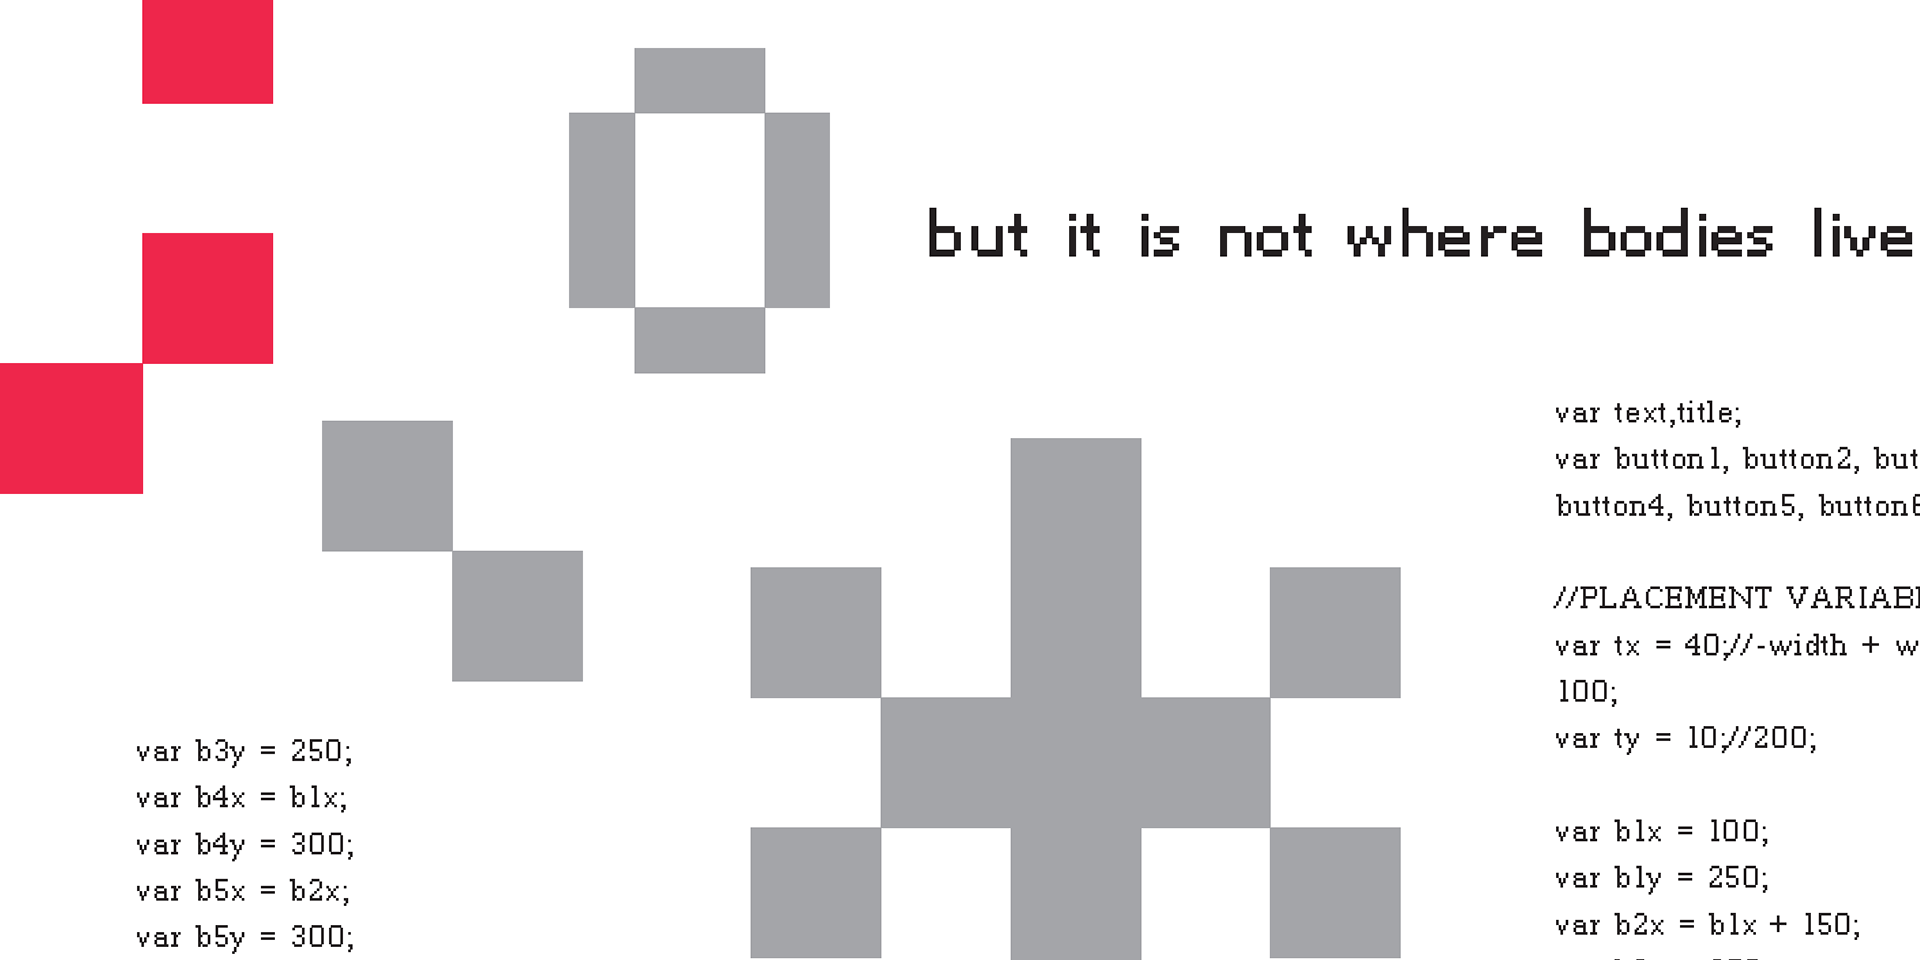 View full size version of two-page spread of large, pixelated characters, text and code